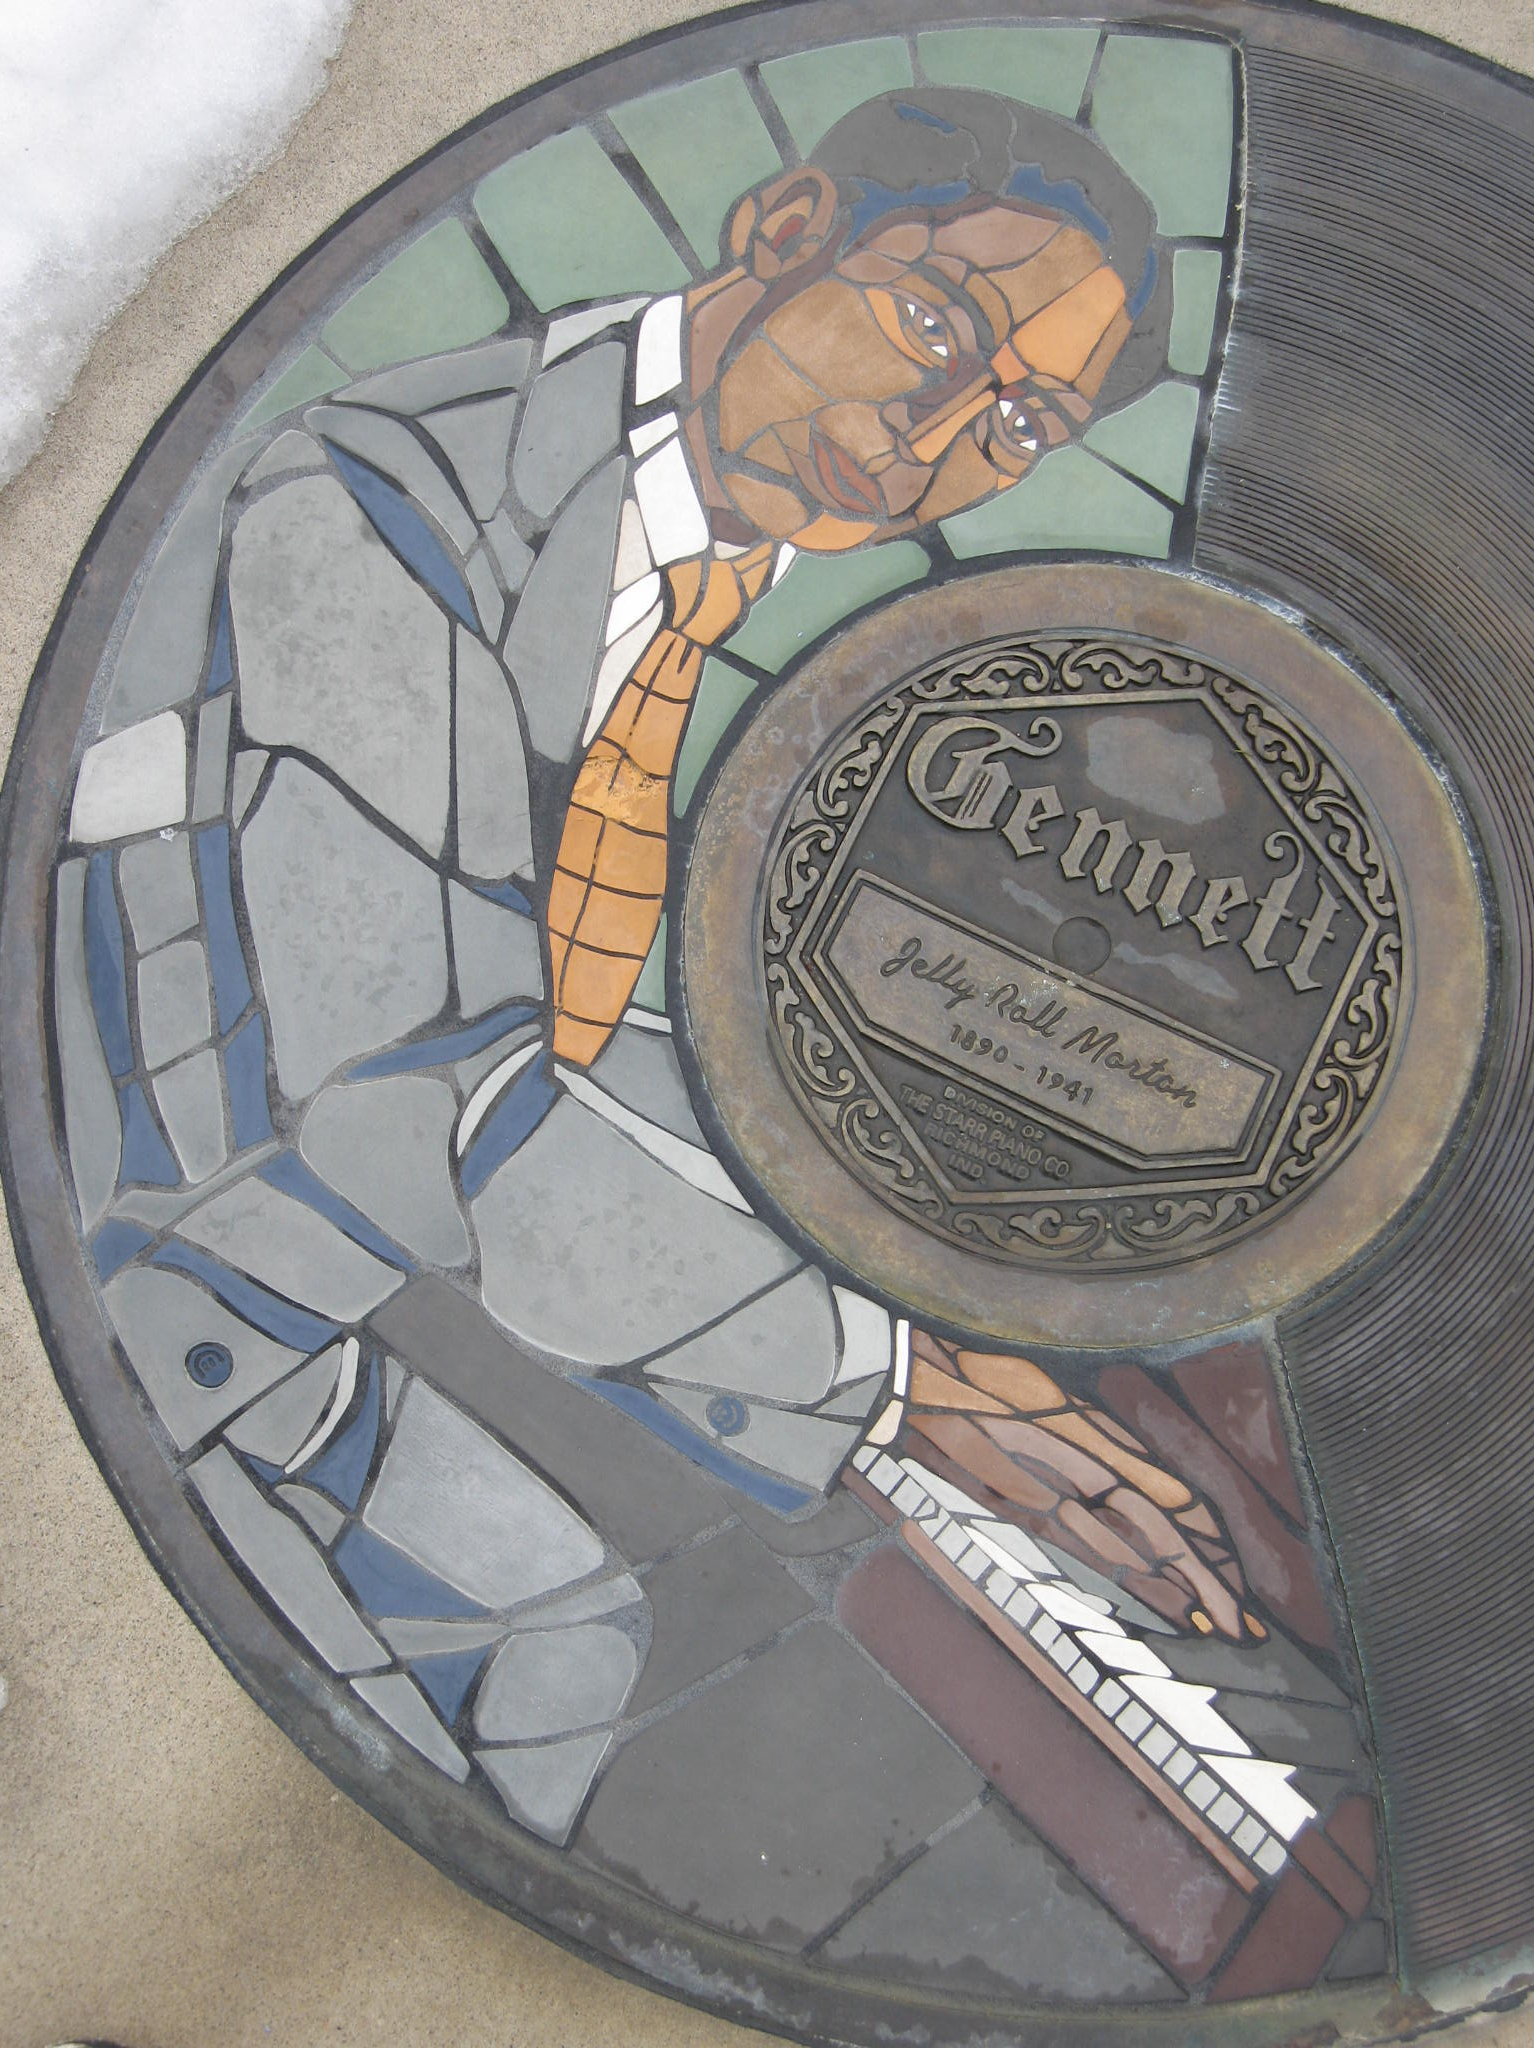 close-up of Jelly Roll Morton's plaque on the Gennett walk of fame.